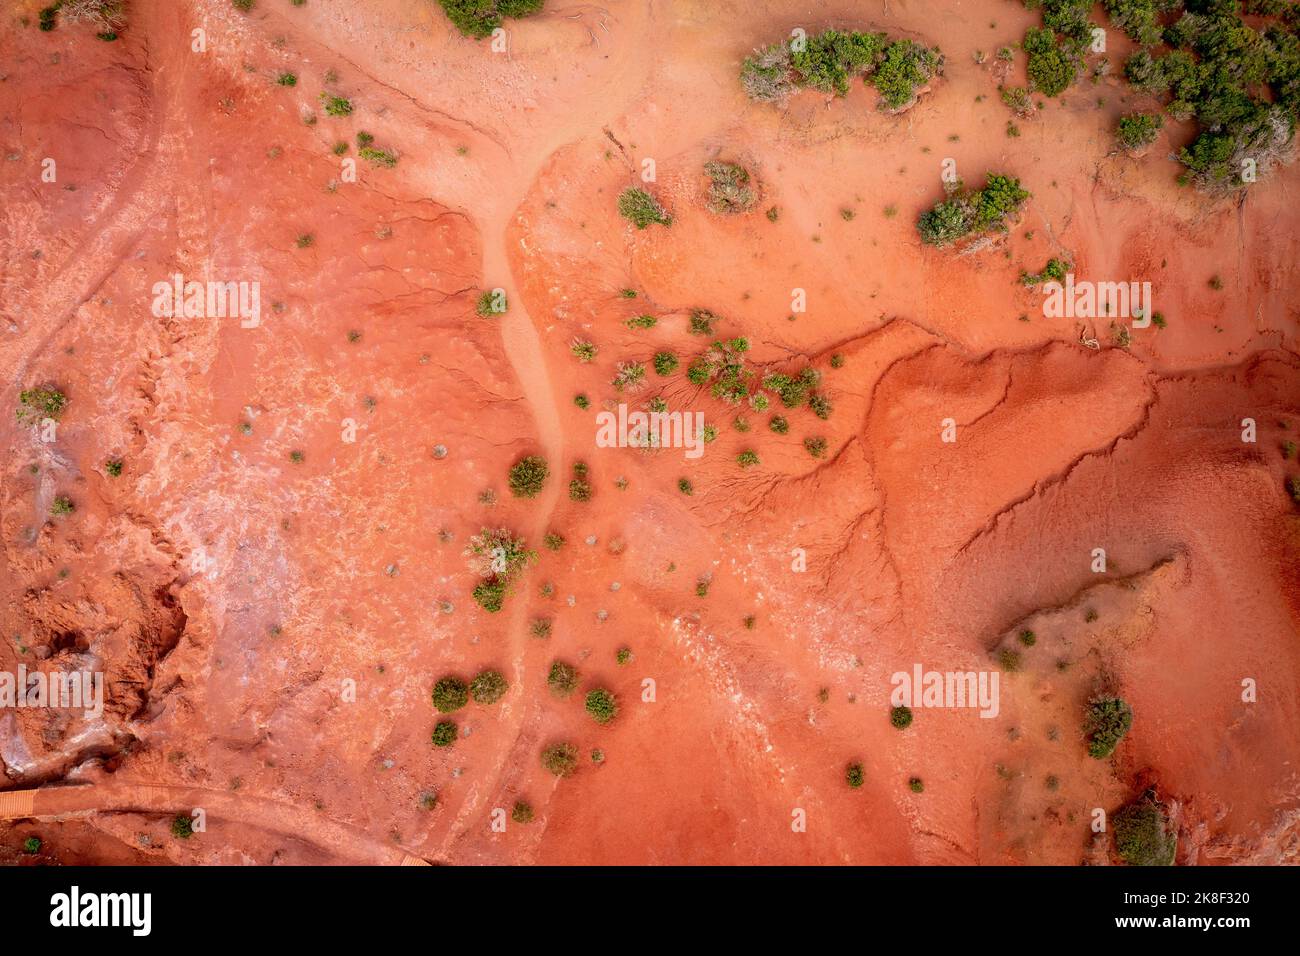 La Gomera, Canary Islands - Aerial view of erosion landscape with red soil on the north coast above Agulo with a view to Tenerife. Stock Photo